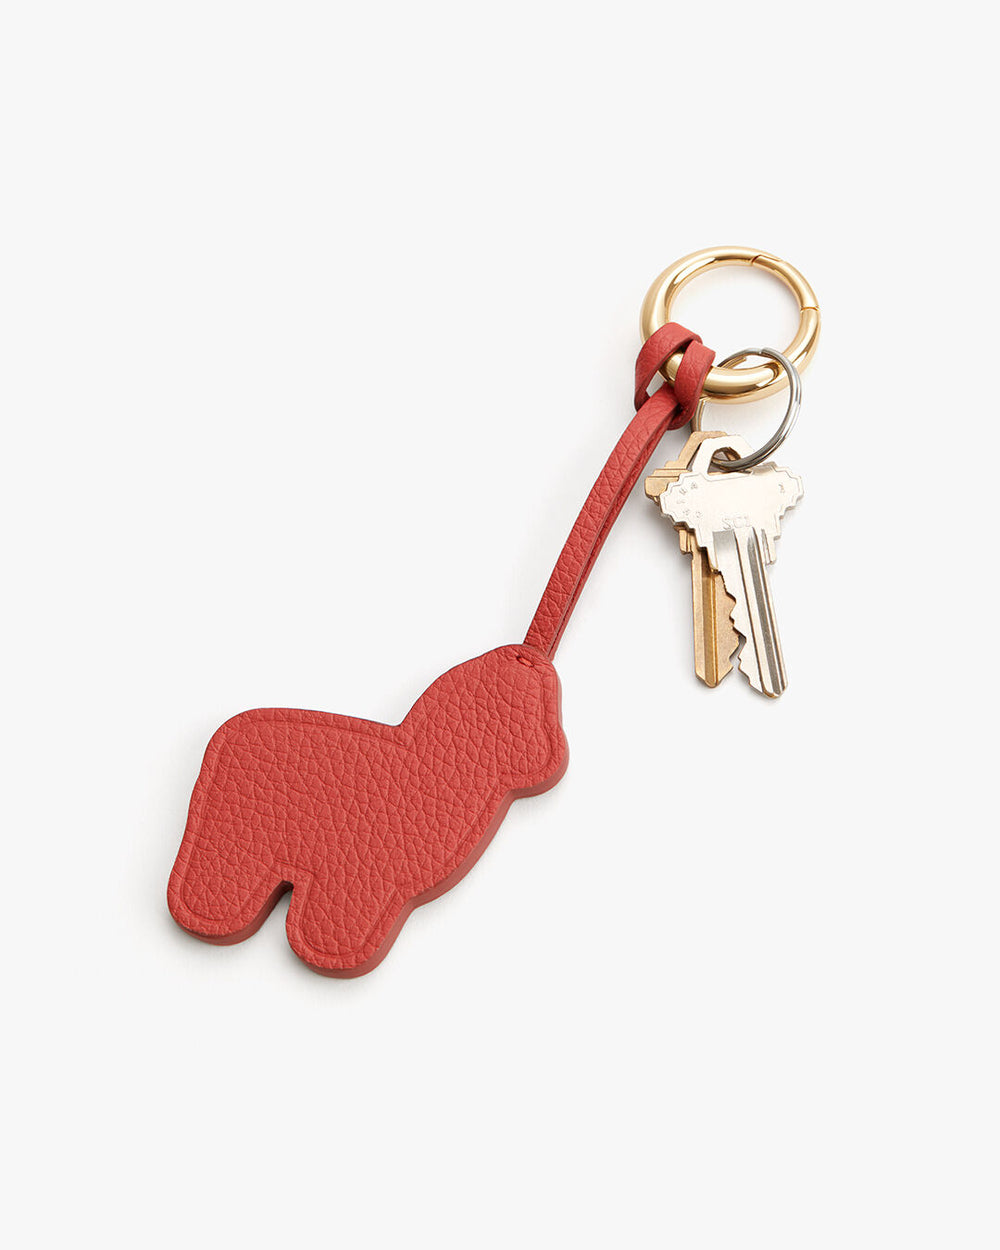 Keychain shaped like an alpaca with attached keys on a ring